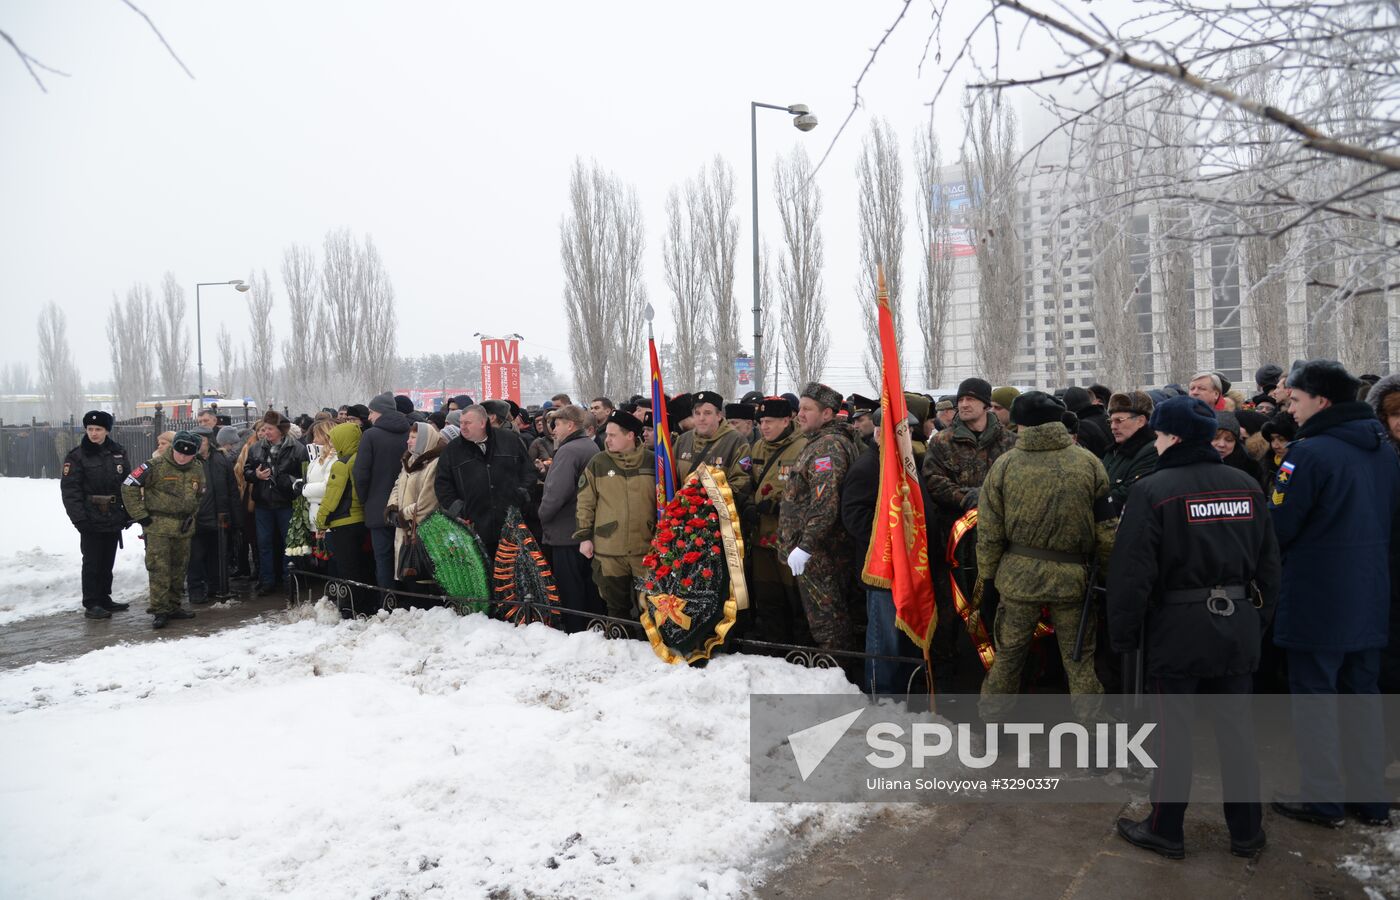 Paying last respects to Major Roman Filipov in Voronezh